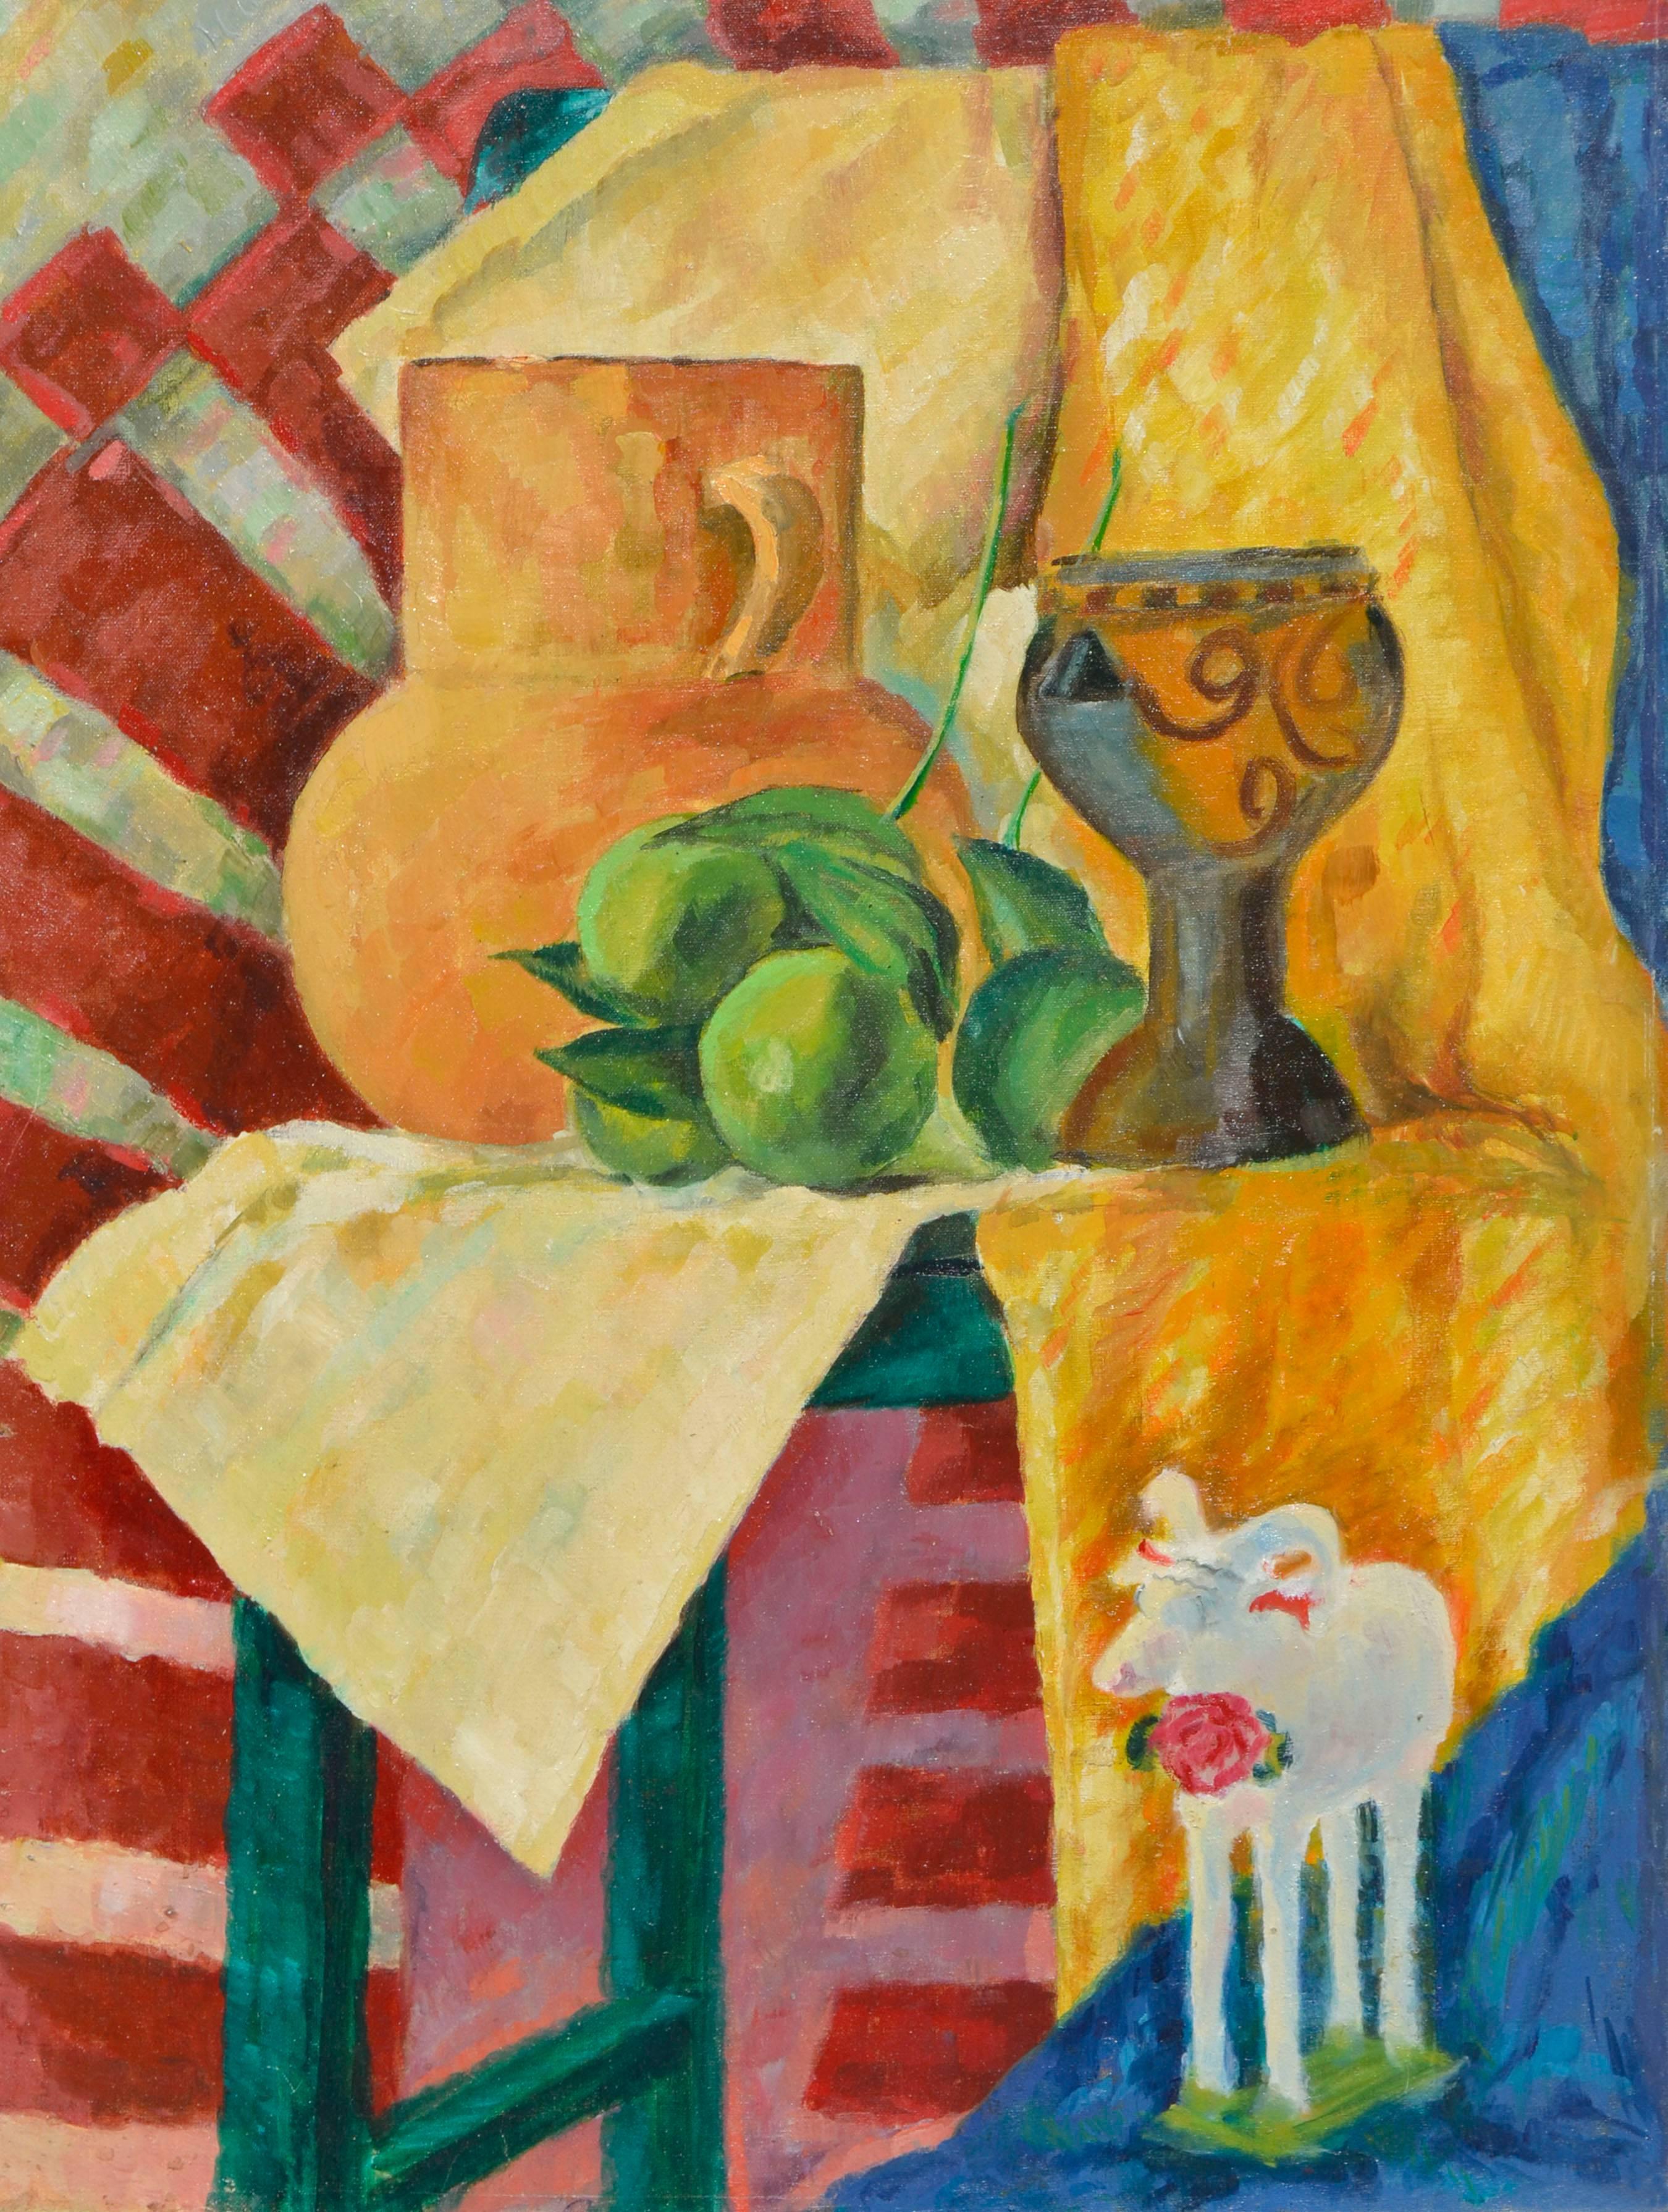 Vibrant Mid Century Still Life - San Miguel de Allende, Mexico - Painting by Mary Miller